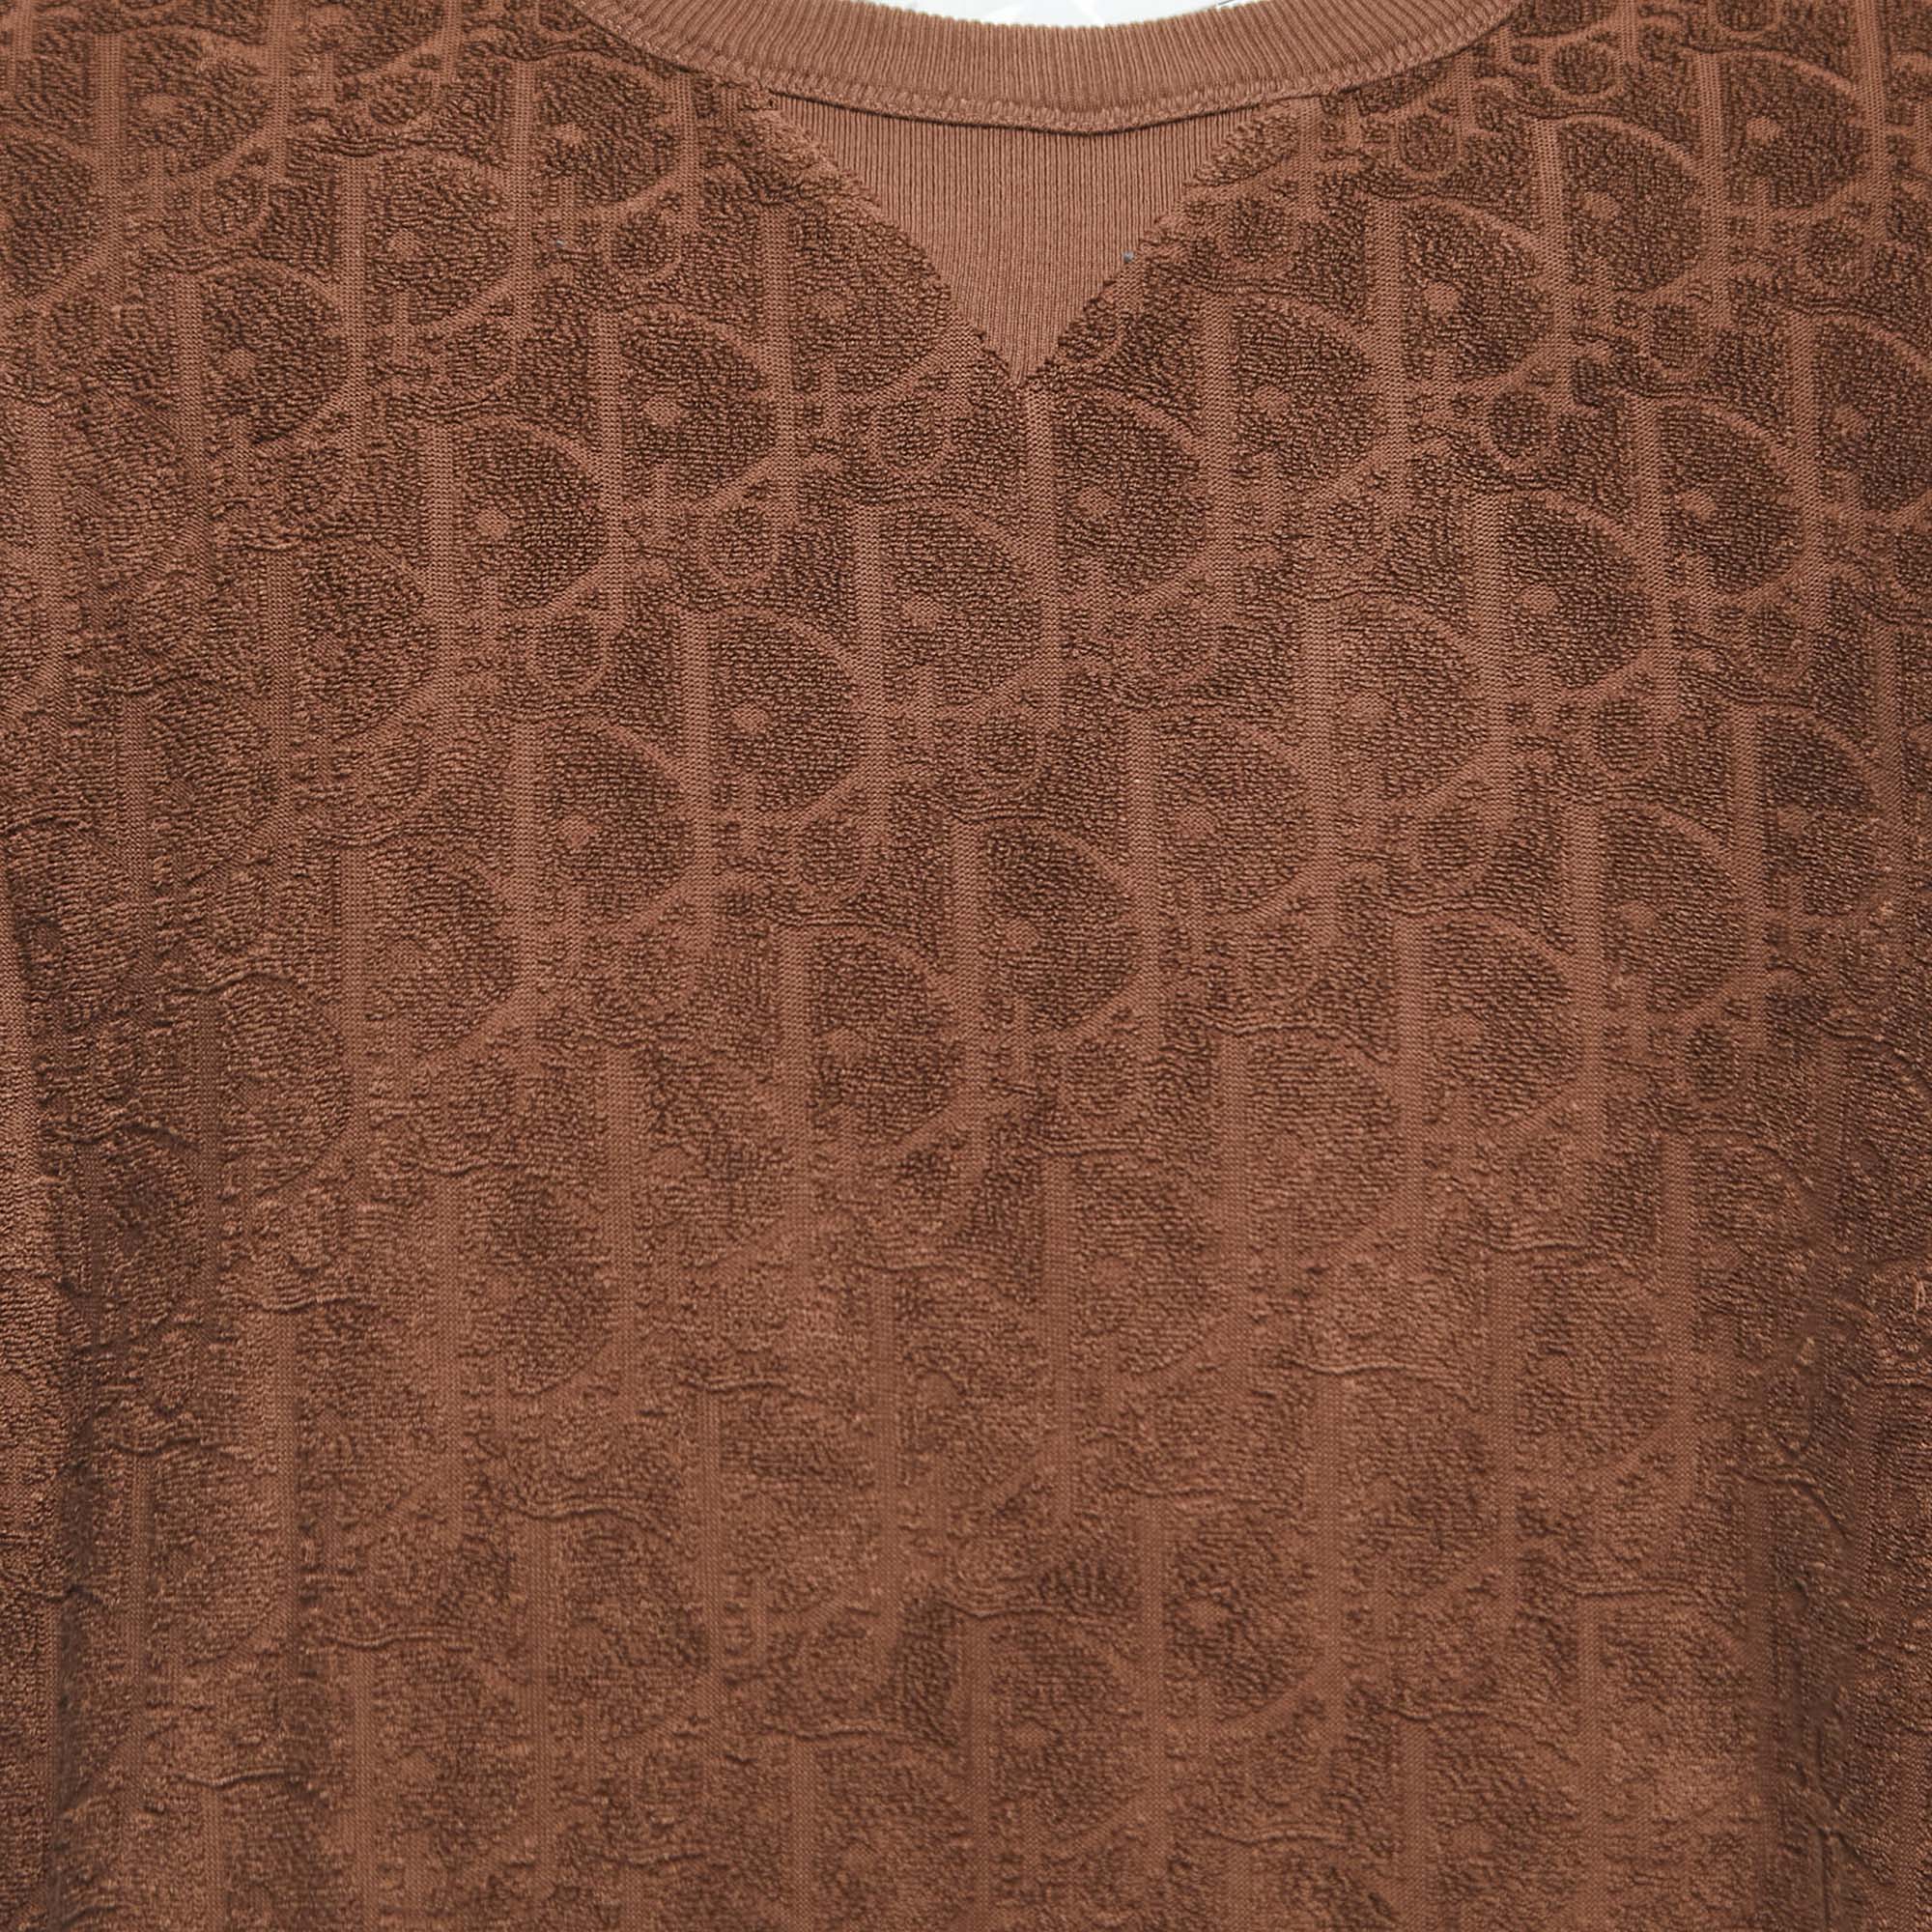 Dior Brown Oblique Jacquard Terry Cotton Relaxed Fit T-Shirt L